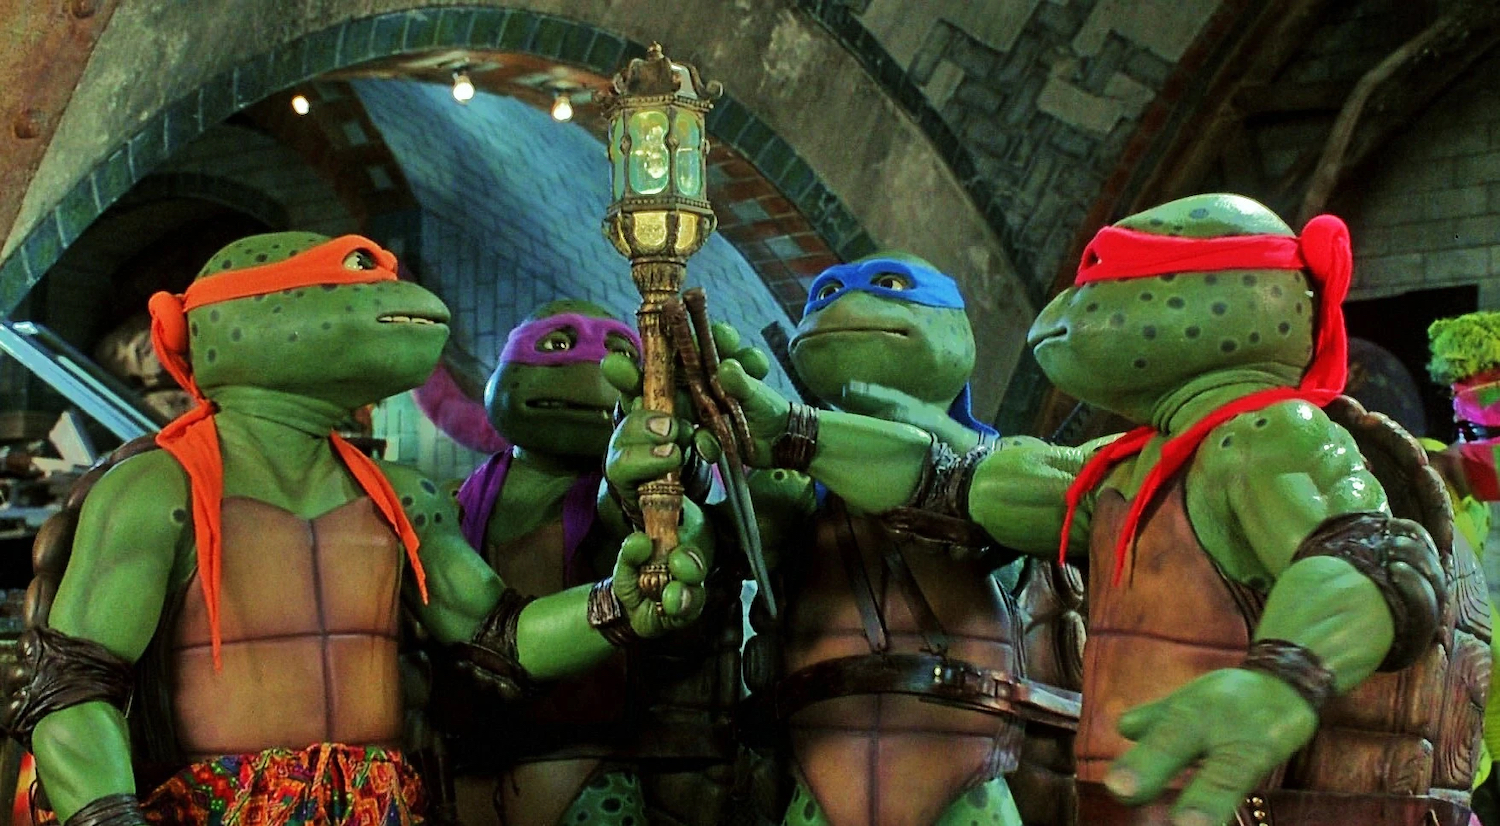 https://www.denofgeek.com/wp-content/uploads/2023/03/Live-action-Mikey-and-Donatello-in-Teenage-Mutant-Ninja-Turtles-III-copy.jpg?fit=1500%2C826